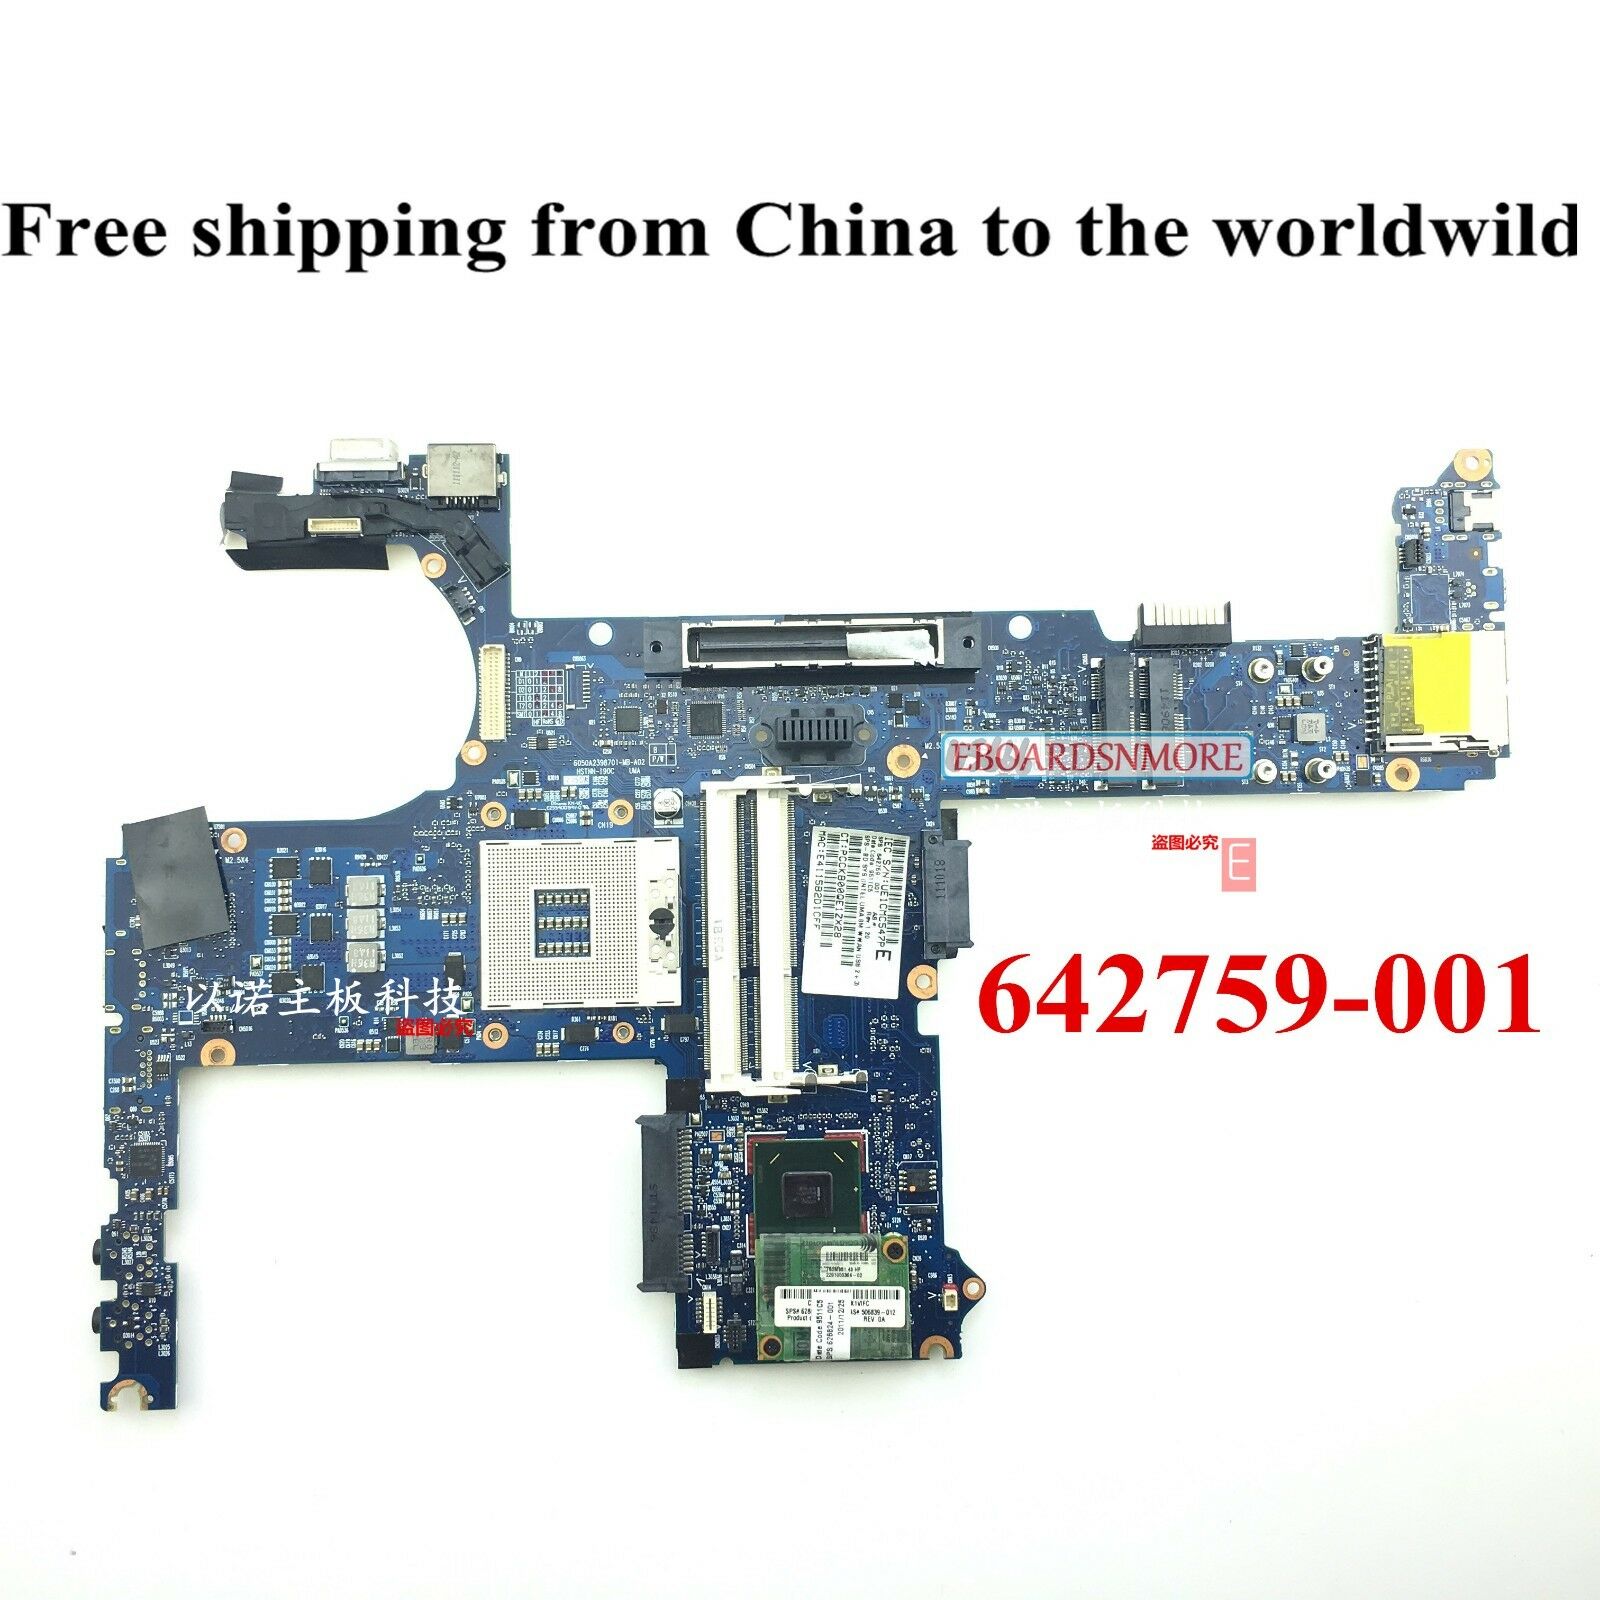 642759-001 Intel QM67 Motherboard for HP EliteBook 8460P Notebook Laptop, A Compatible CPU Brand: Intel Fea - Click Image to Close